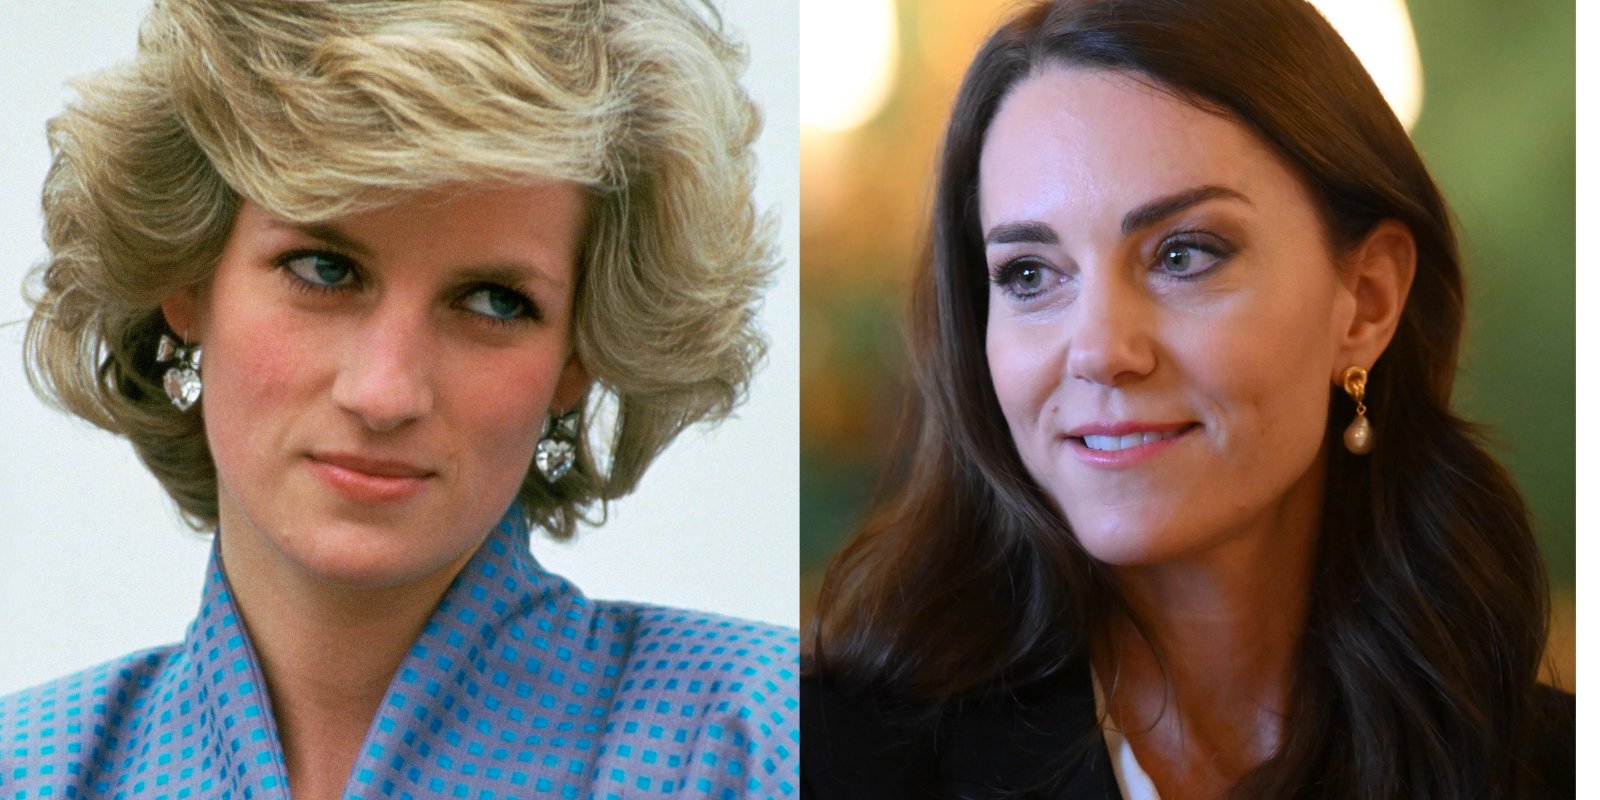 Princess Diana and Kate Middleton in side-by-side photographs.